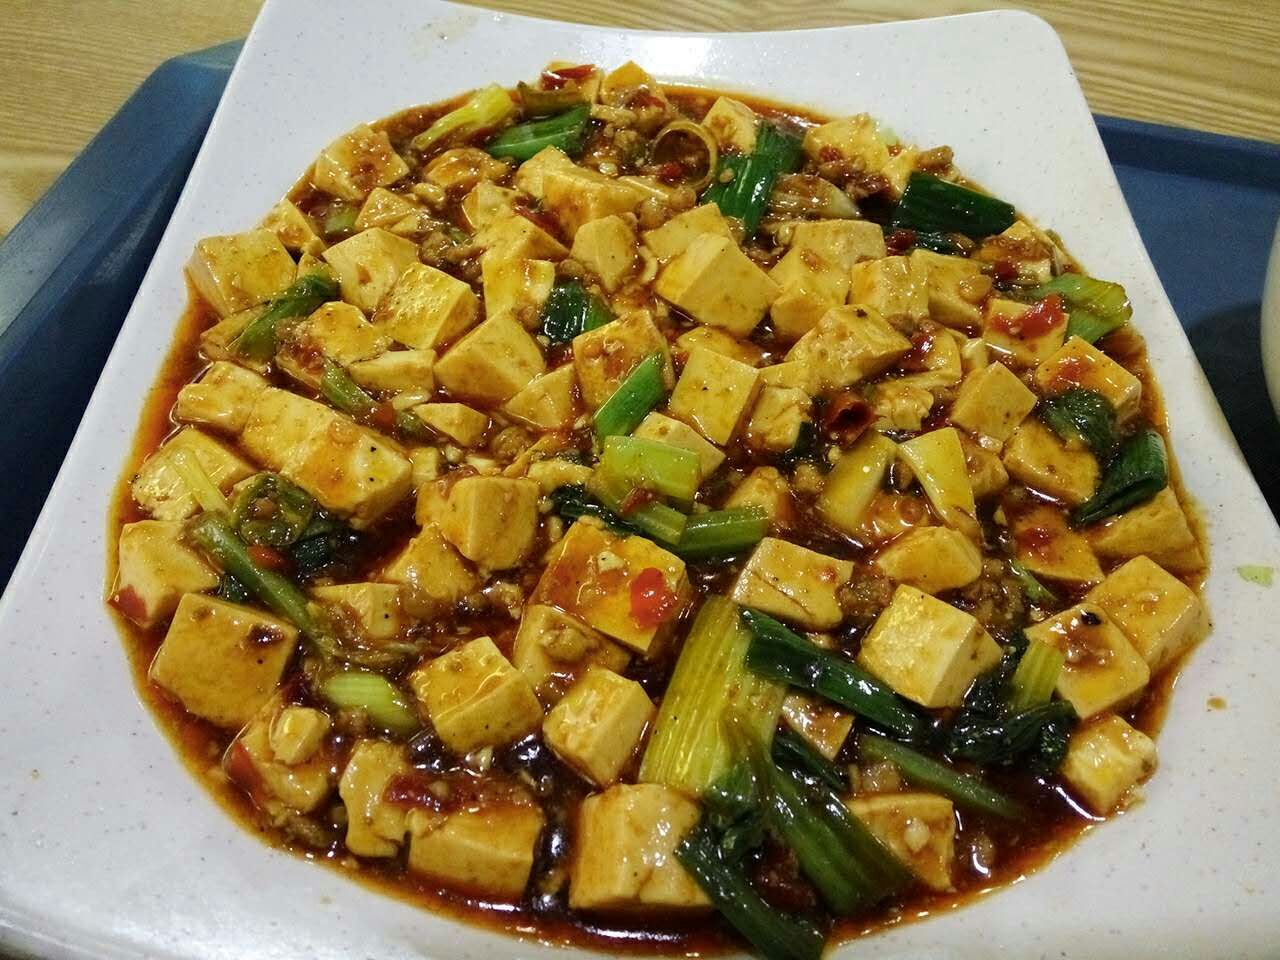 Mapo Tofu (麻婆豆腐) – my favourite spicy food from Sichuan province of China.